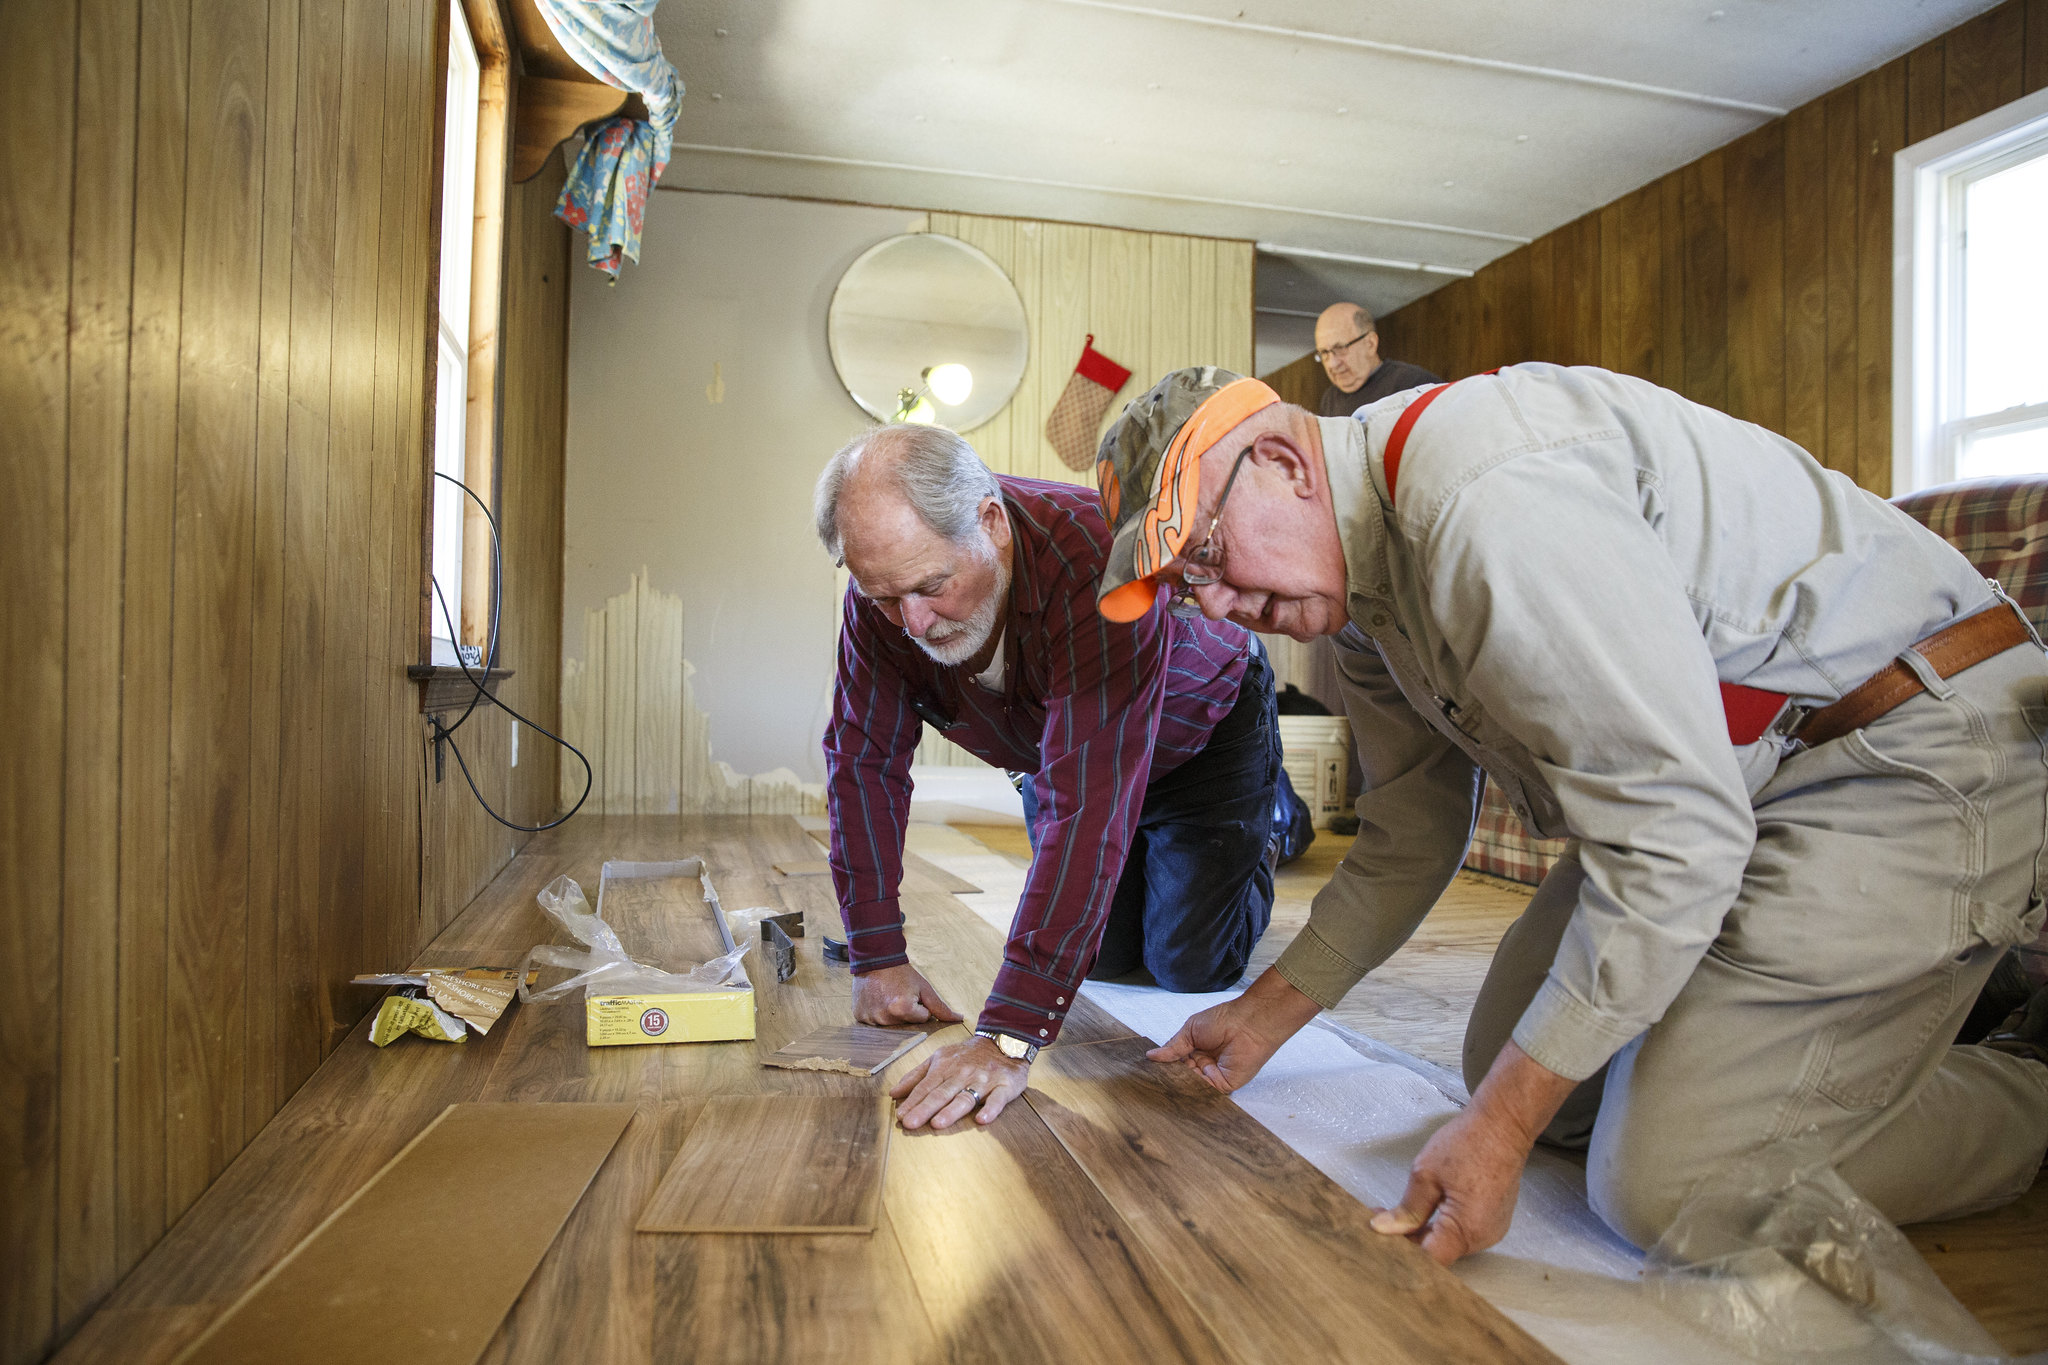 A partnership with Good Works connects residents to people needing basic home repair